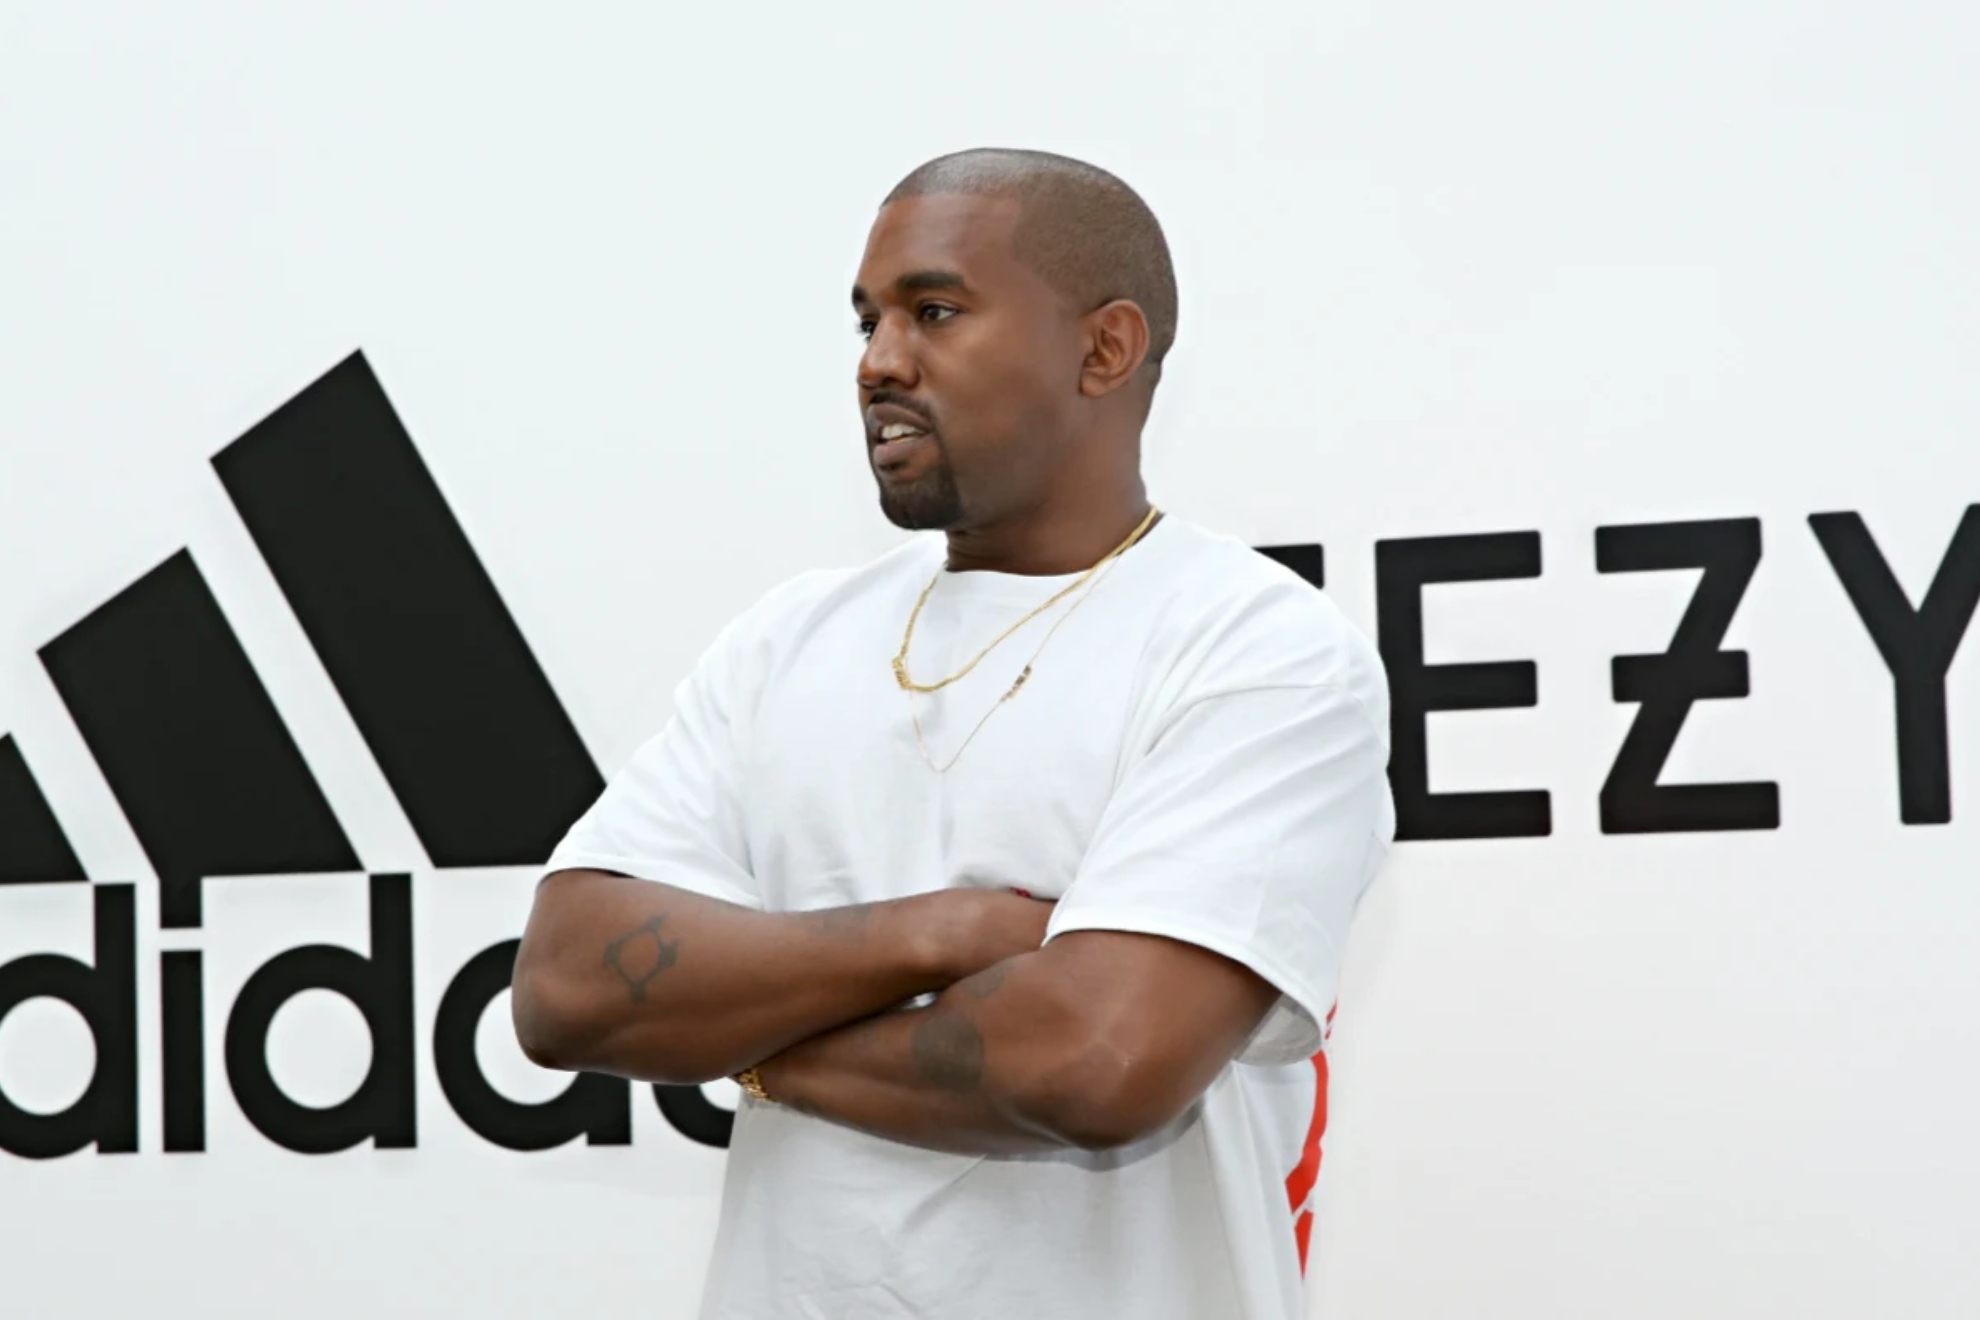 Kanye West announcing his longterm partnership with Adidas in 2016